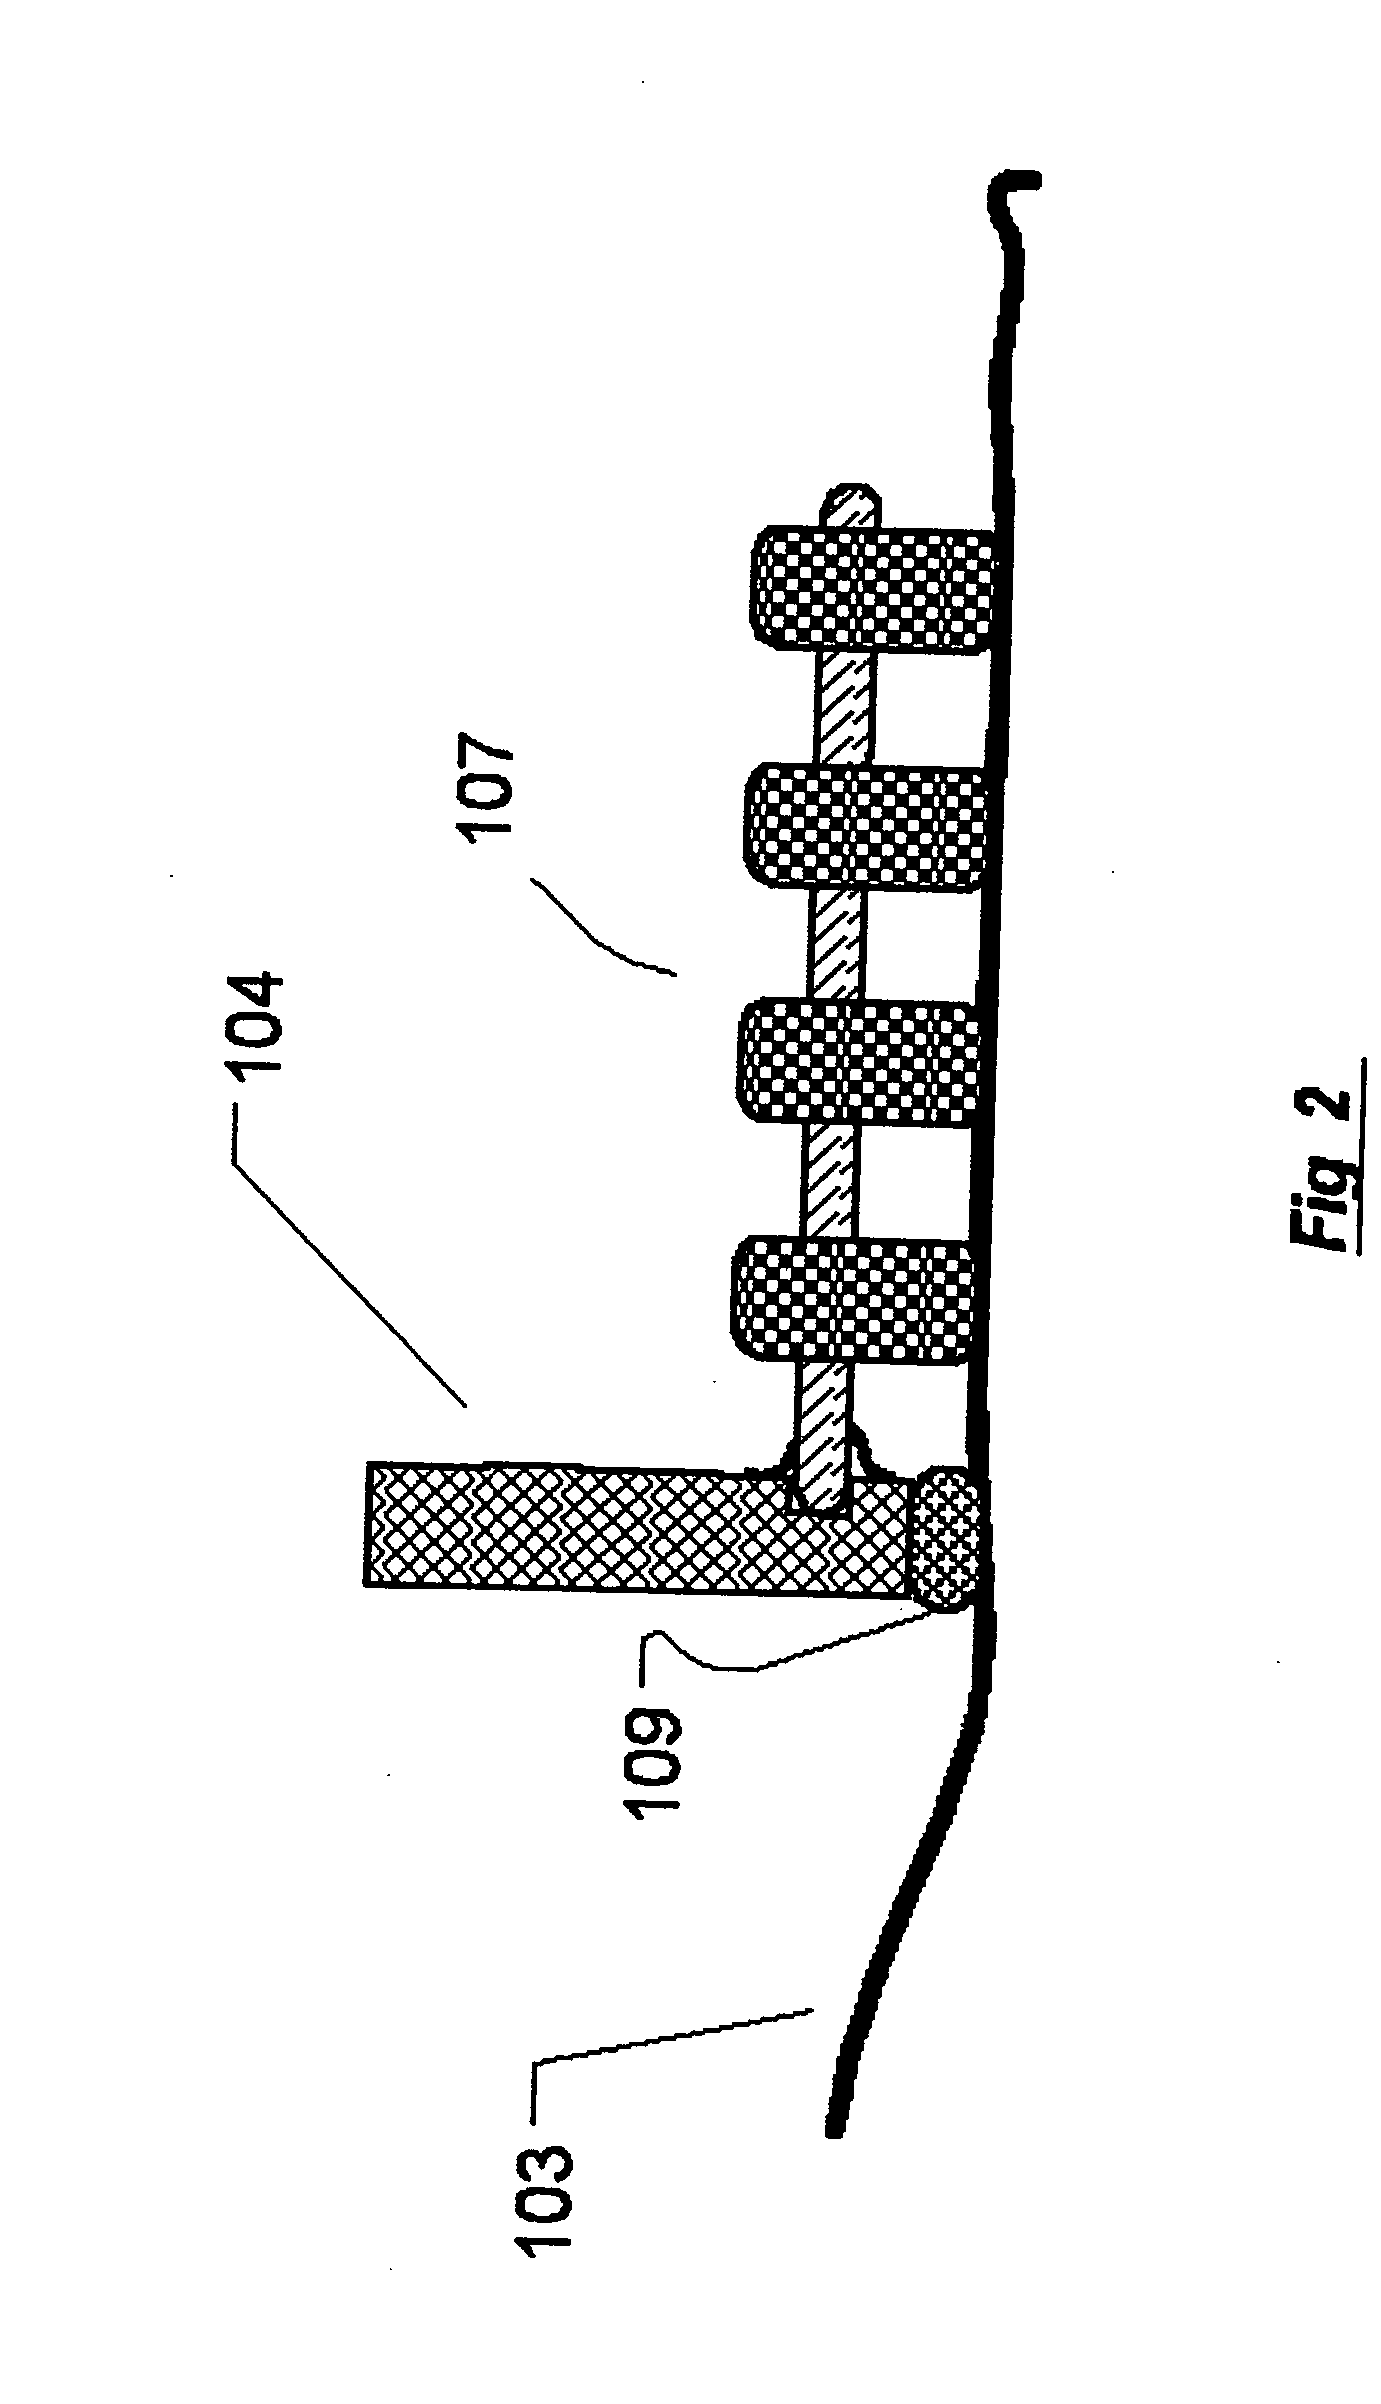 Adapter for multi-element contact-probe